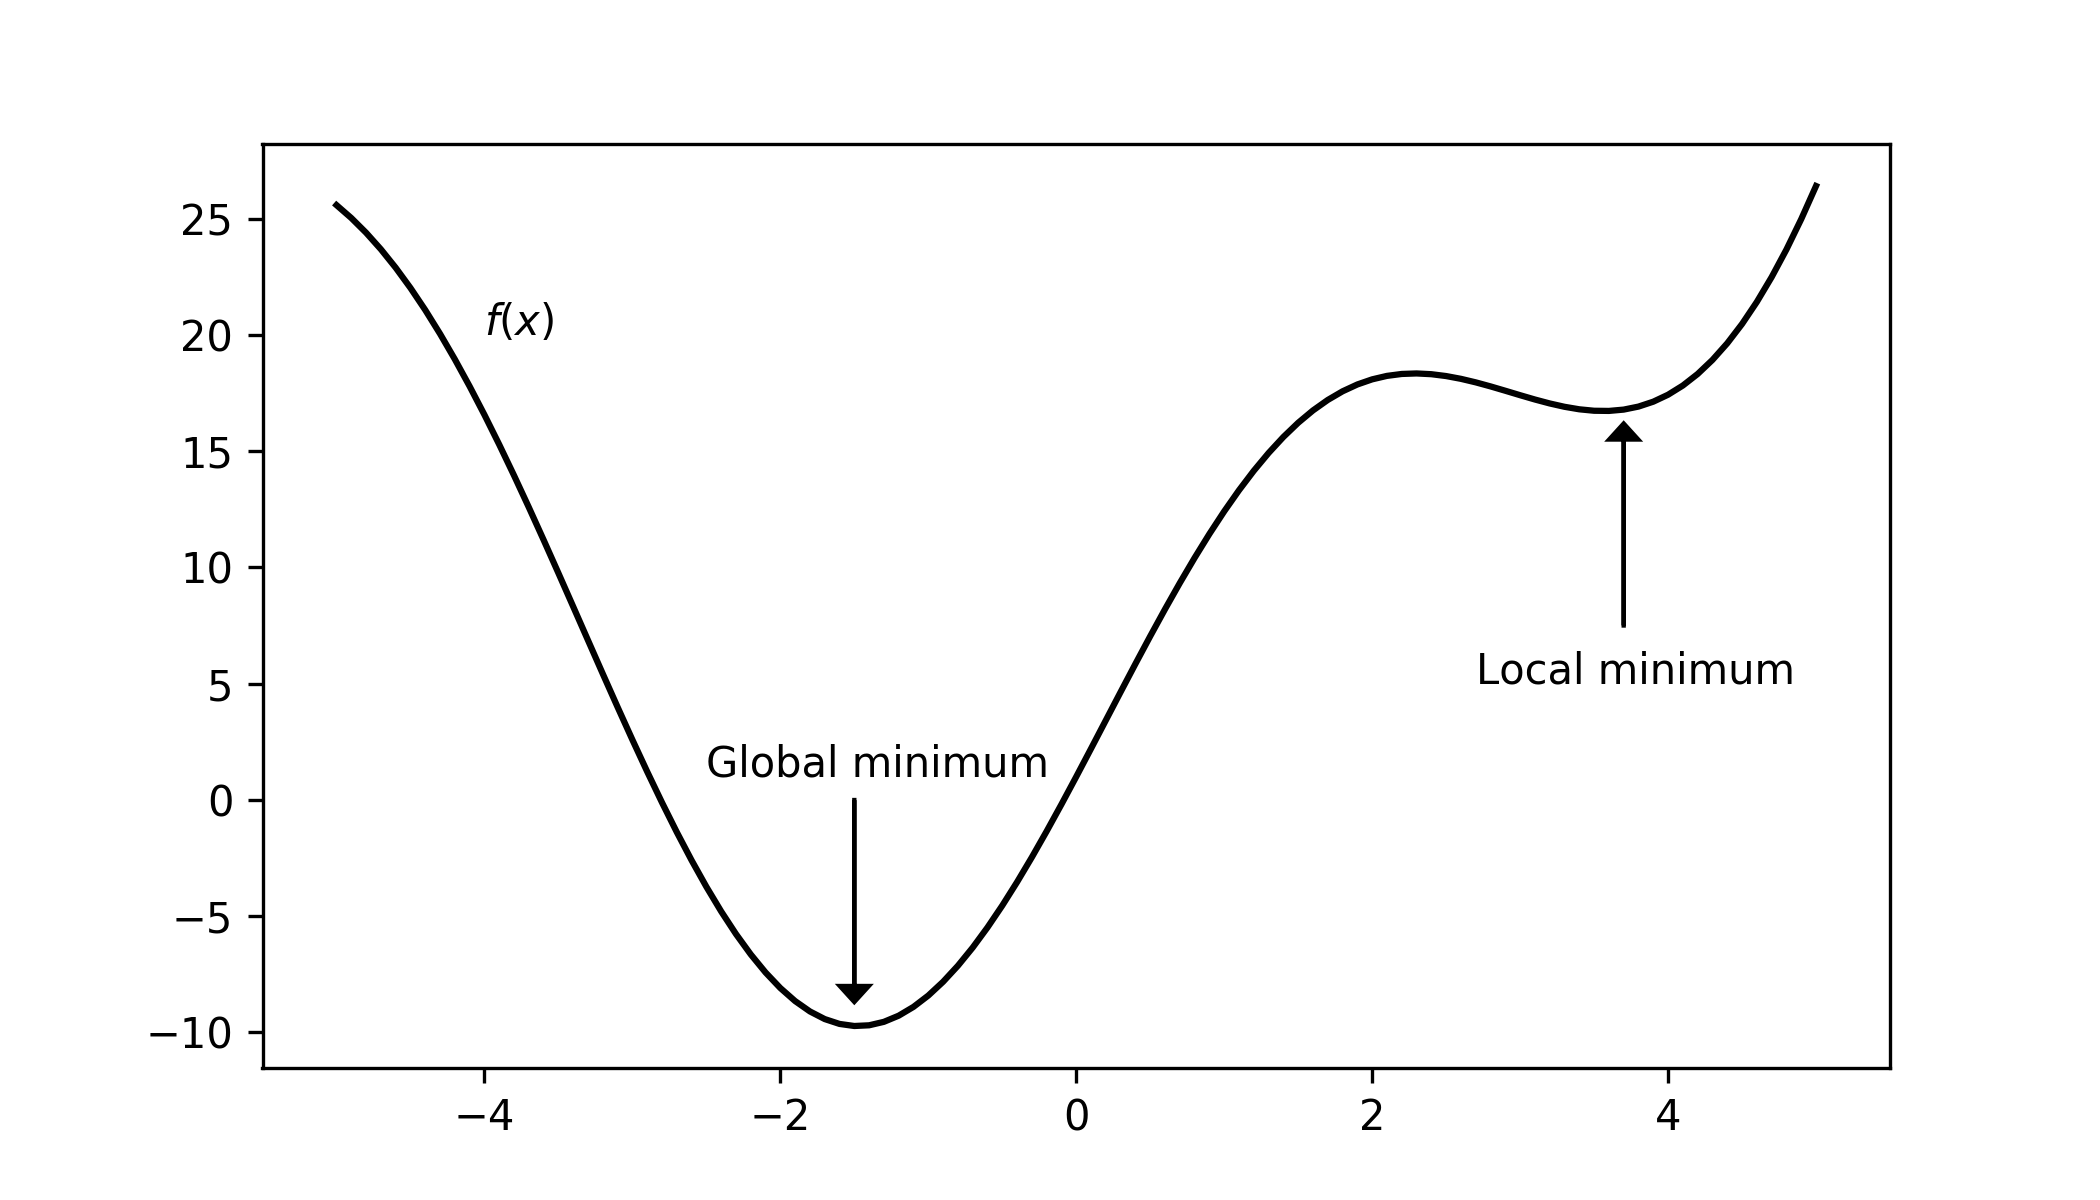 Comparison between local and global minimum